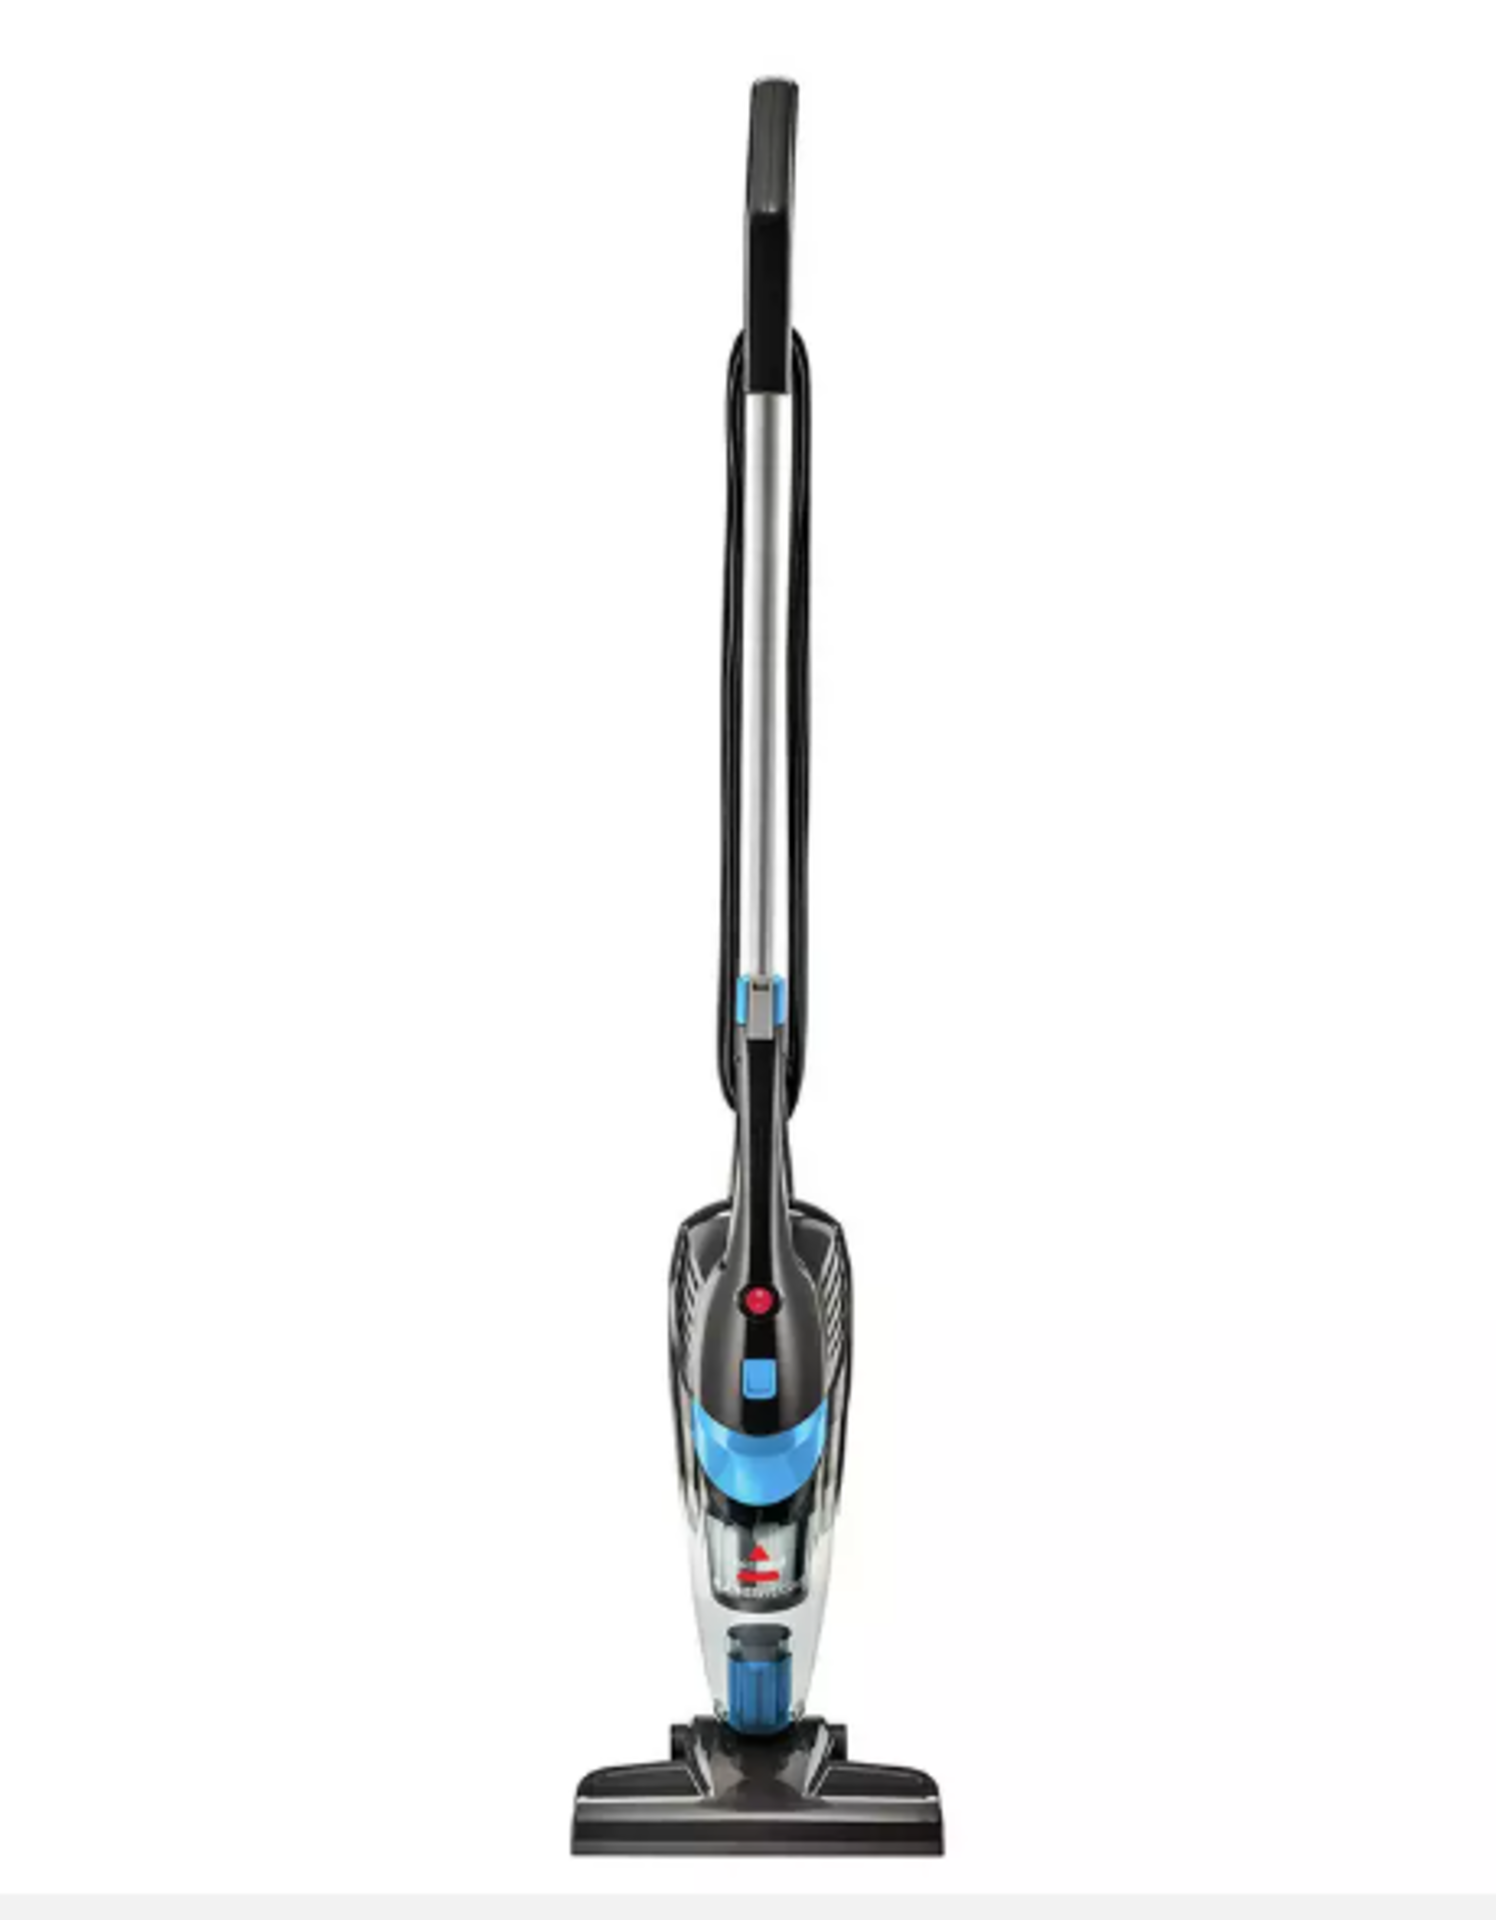 Bissell Featherweight Corded Bagless Upright Vacuum Cleaner. RRP £95.00. - EBR. A 2-in-1 lightweight